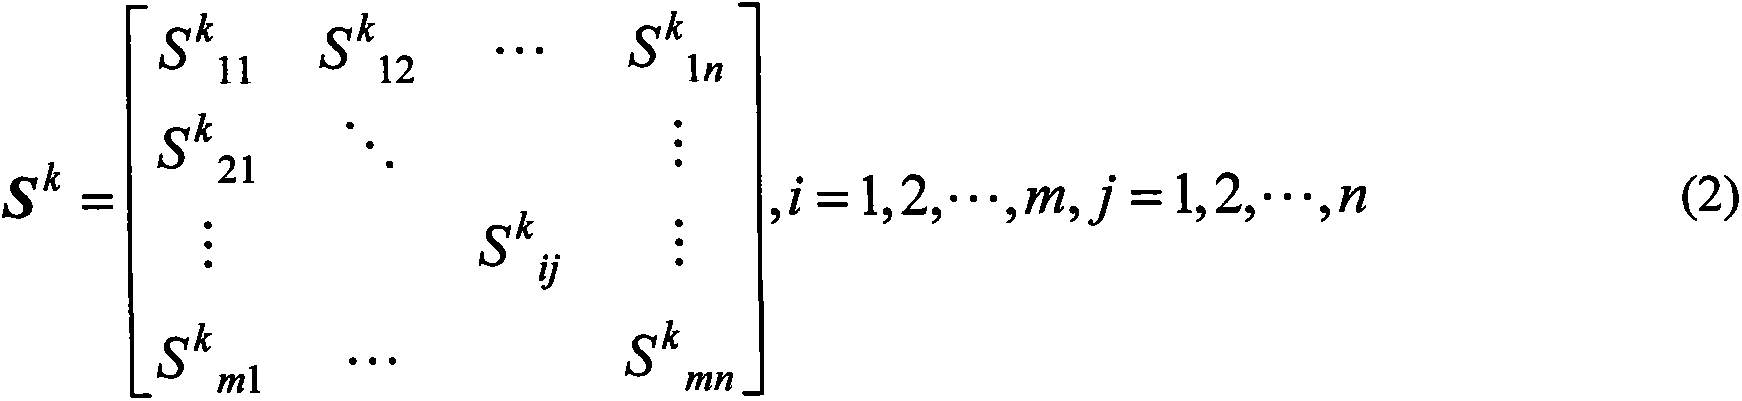 Similarity measuring algorithm for sequences in different lengths